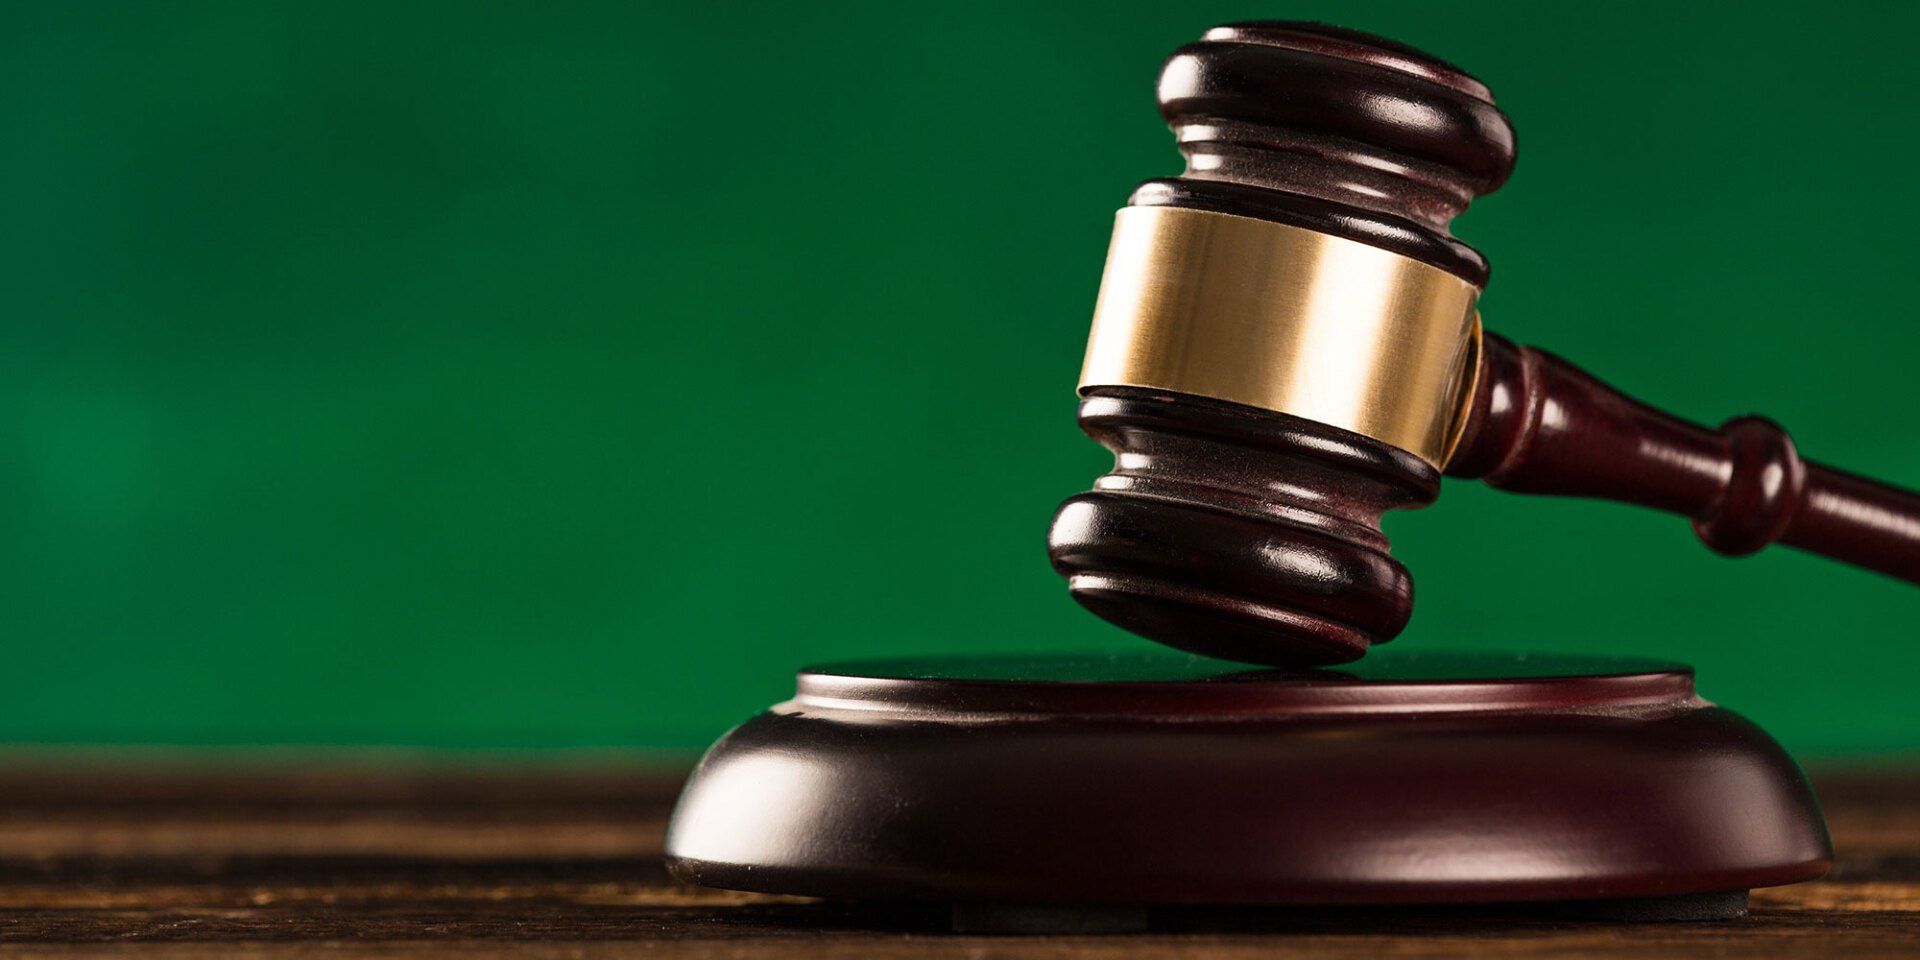 gavel in front of green background